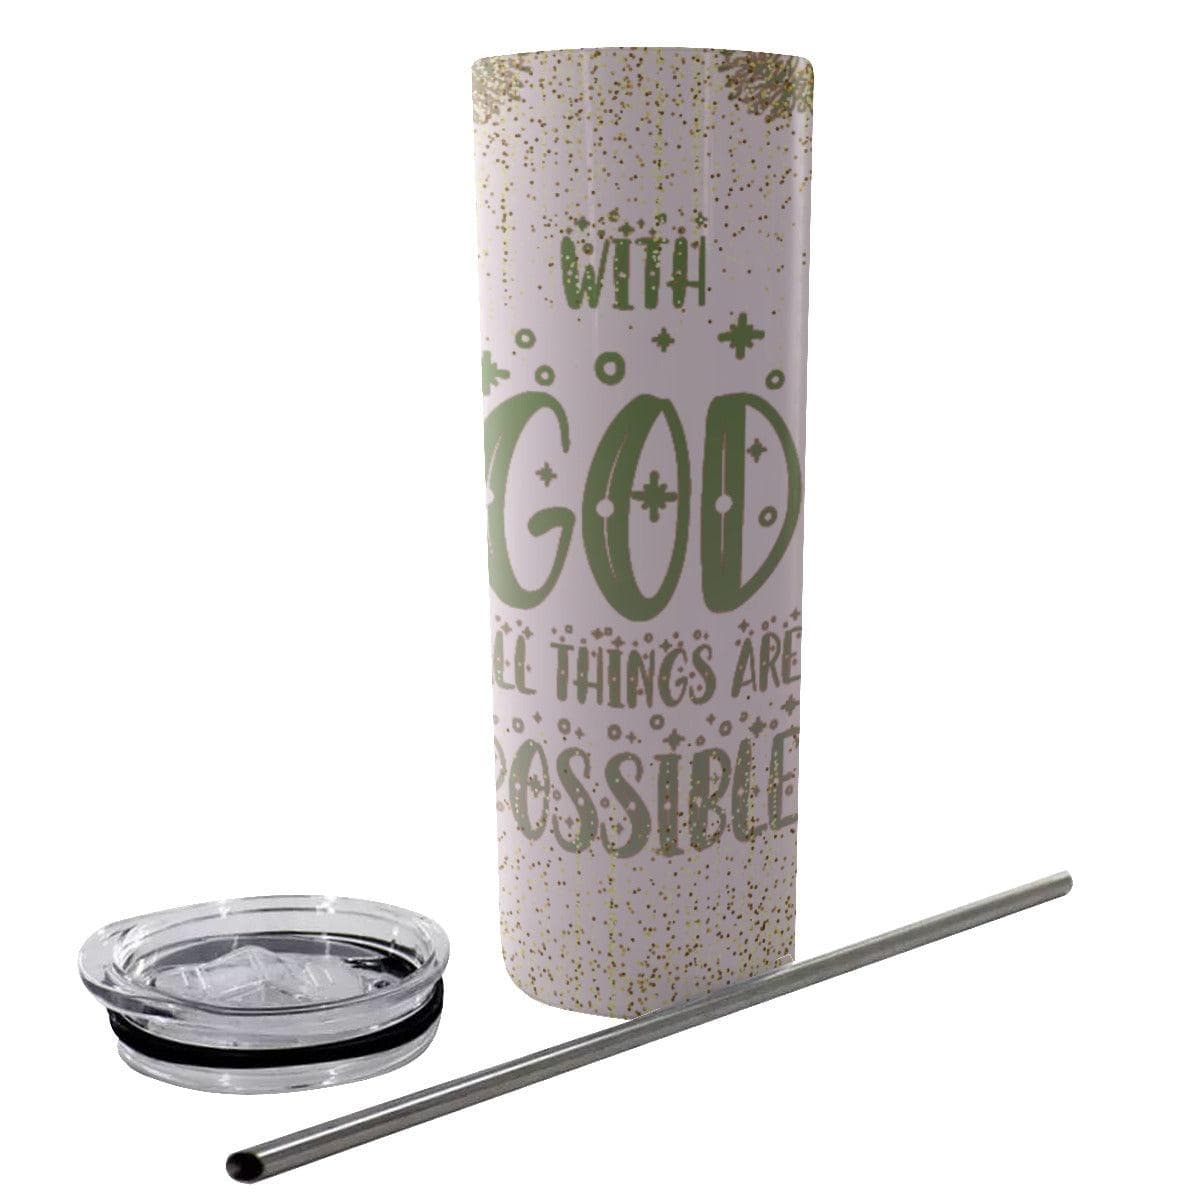 All things Possible Tumbler With God Stainless Steel Straw Tumbler 20oz